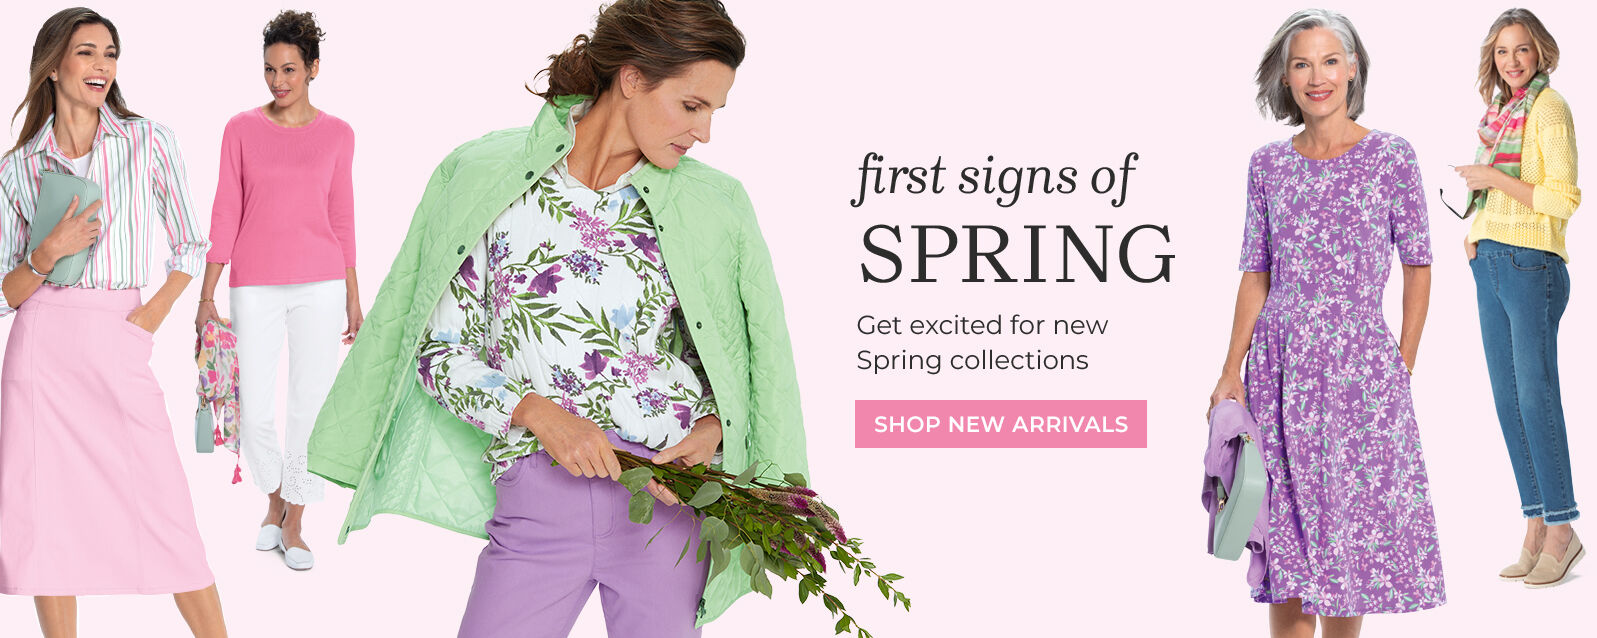 first signs of spring shop new arrivals